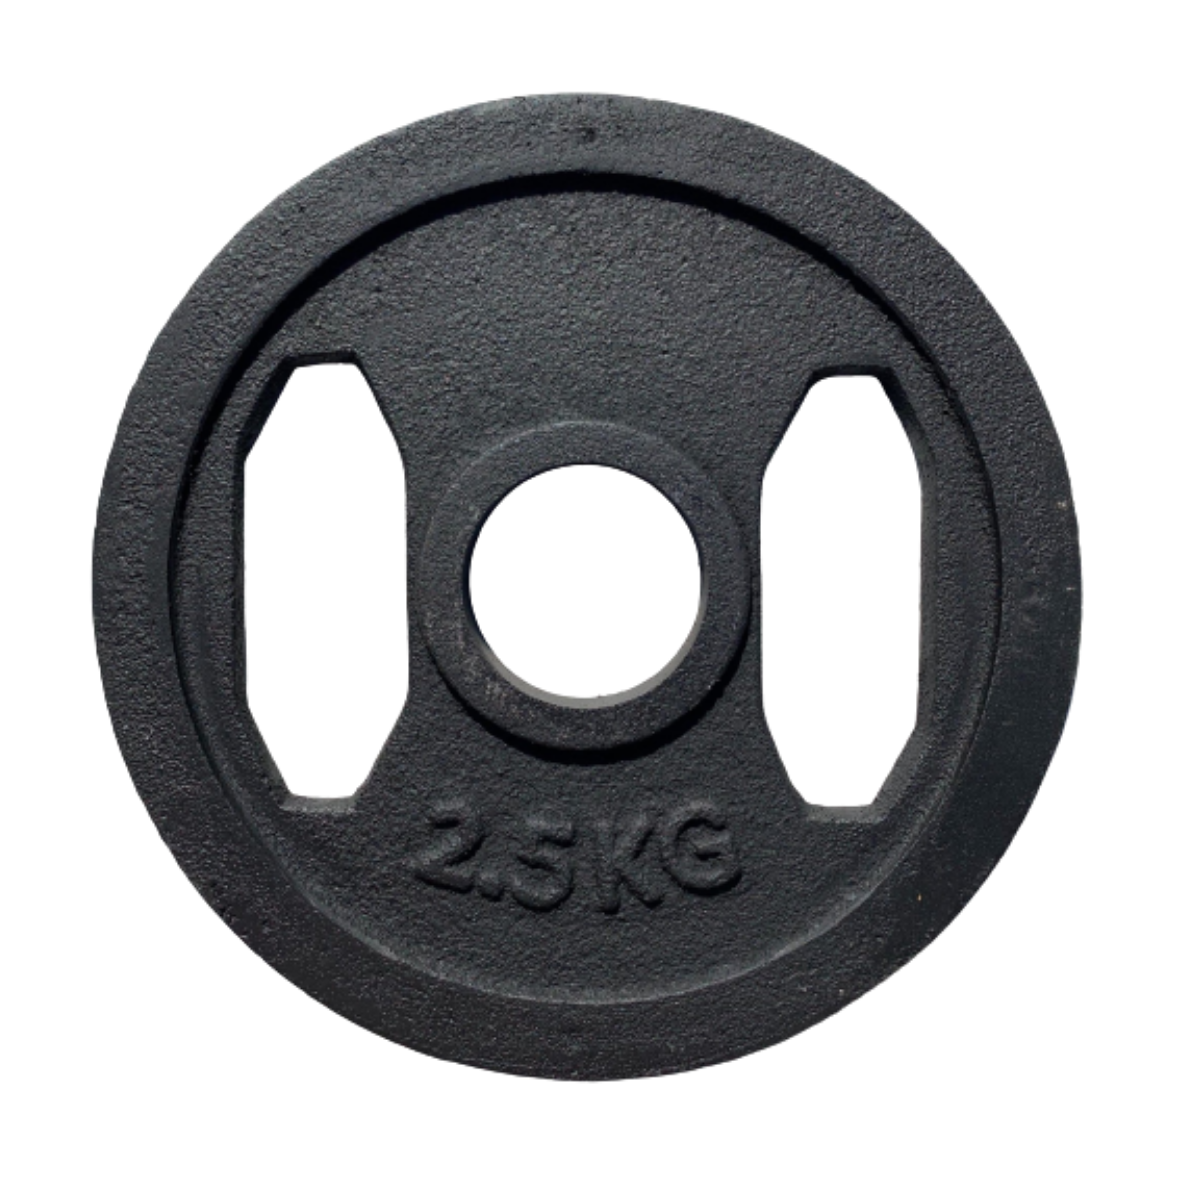 Olympic Cast Iron Weight Plates 2.5KG (Pair)